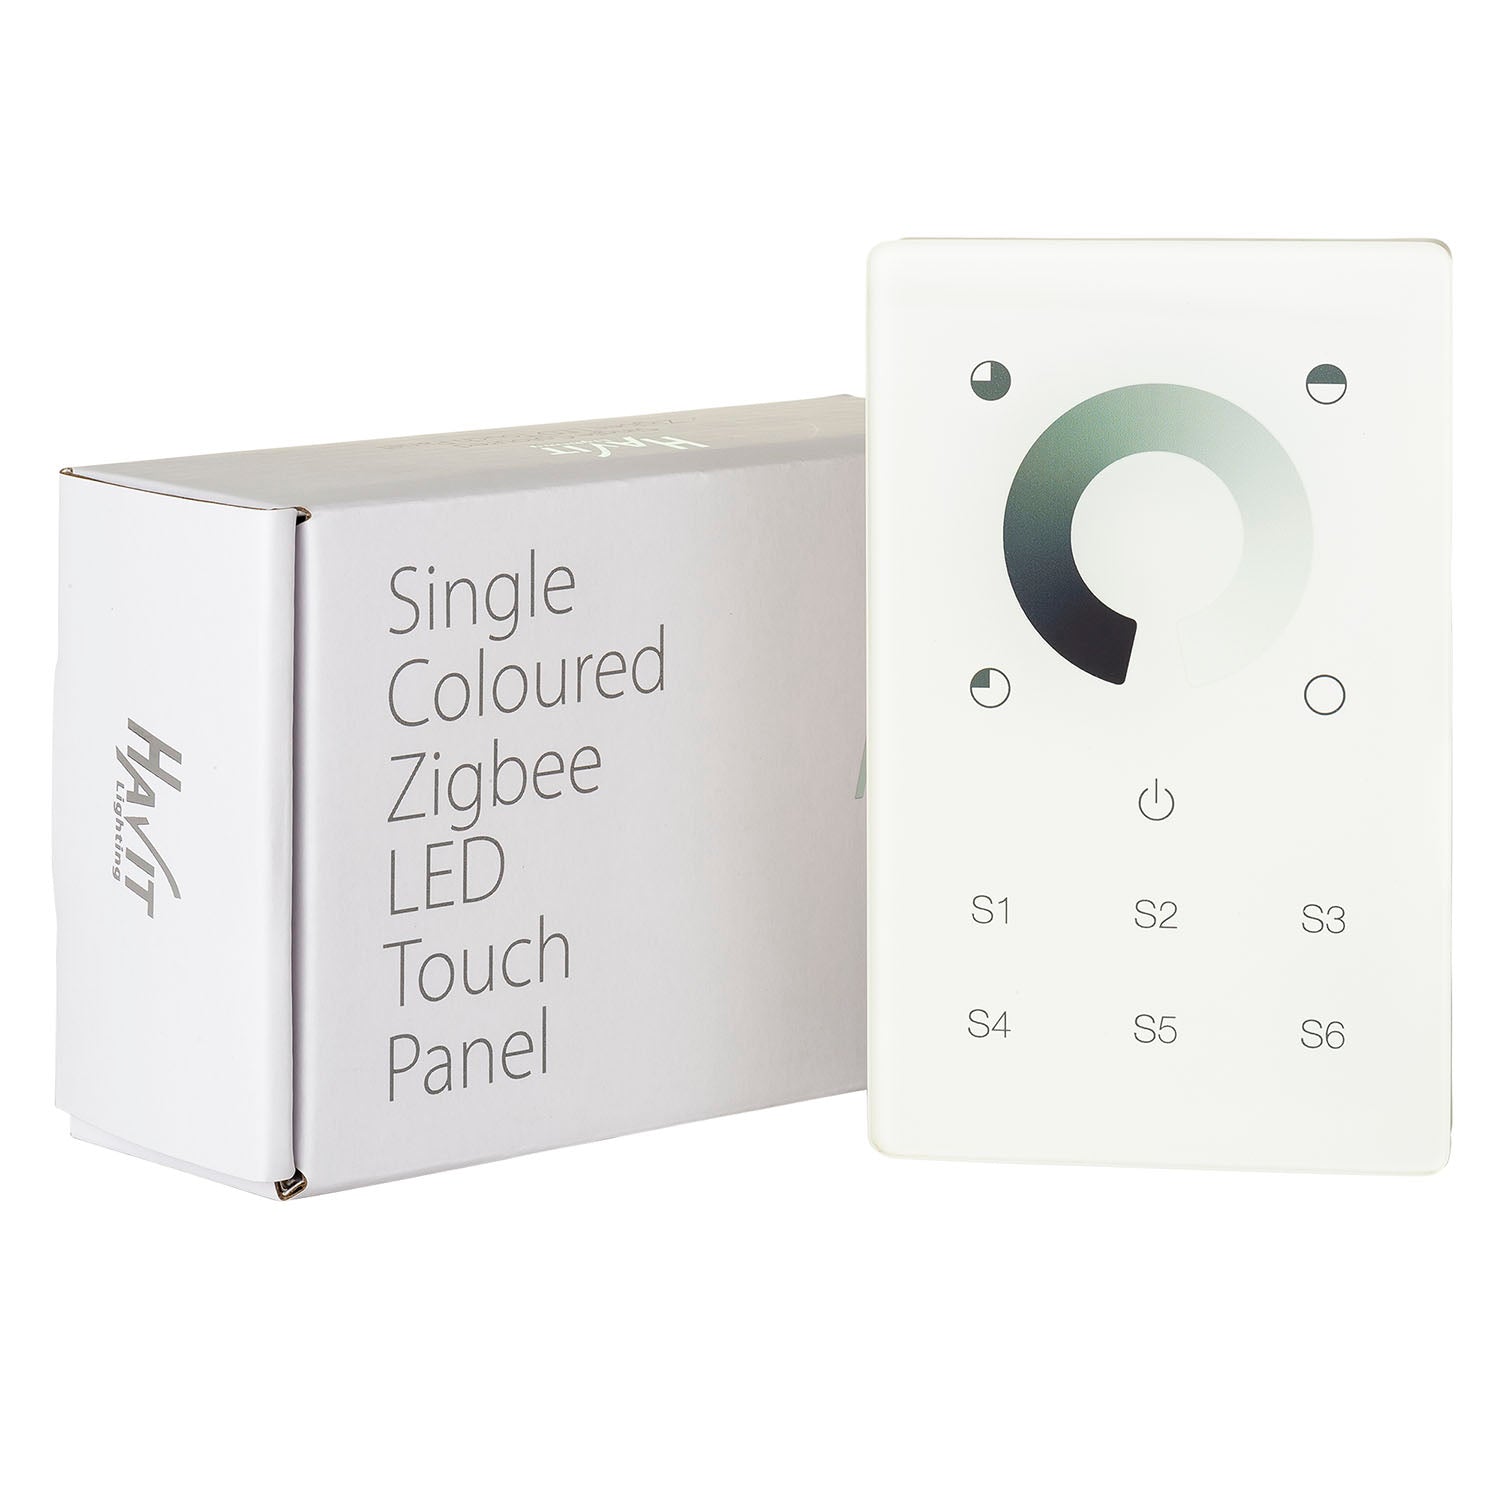 HV9101-ZB-SCTP - Single Coloured Zigbee LED Touch Panel